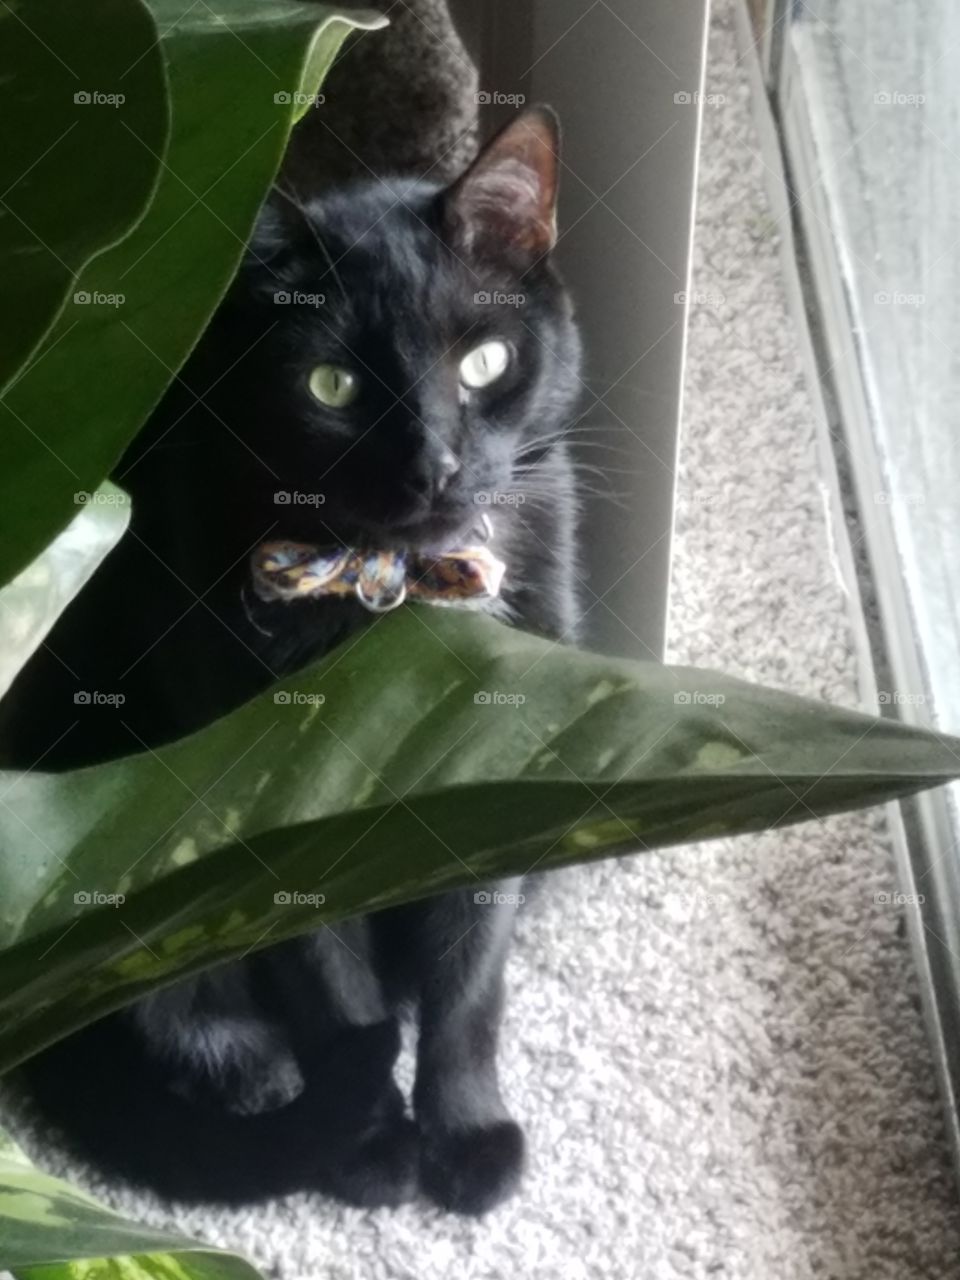 zachary with his bowtie hiding behind a plant